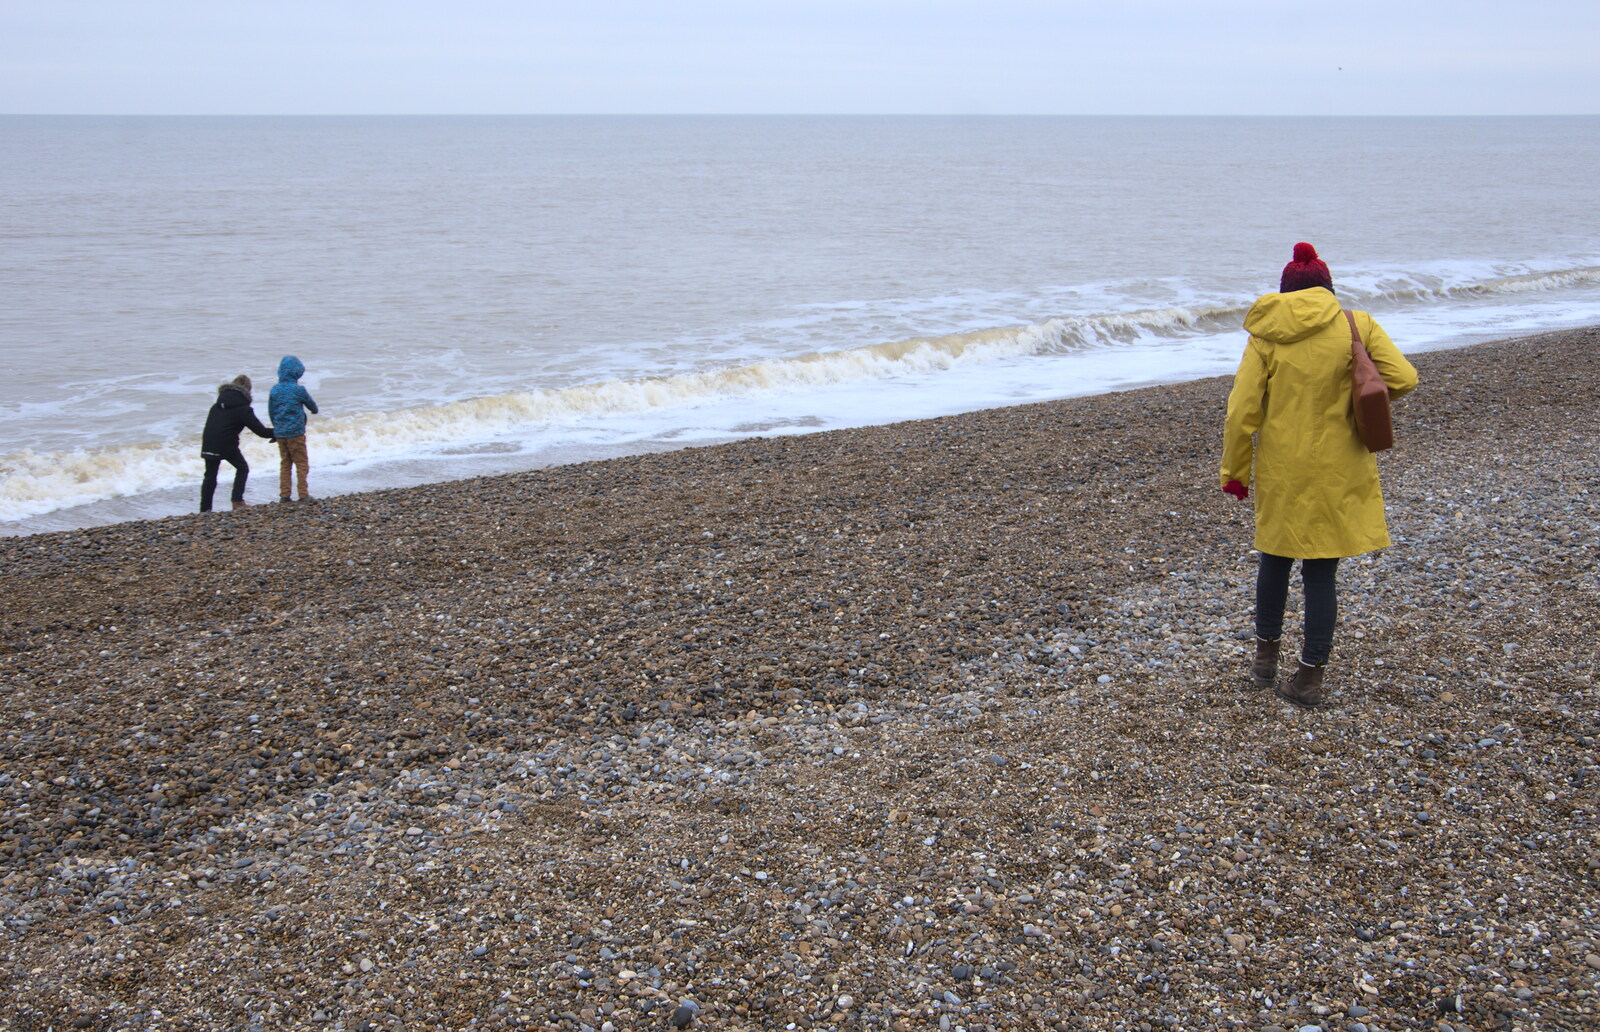 The boys and Isobel on the beach from A Postcard from Aldeburgh, Suffolk - 6th January 2019